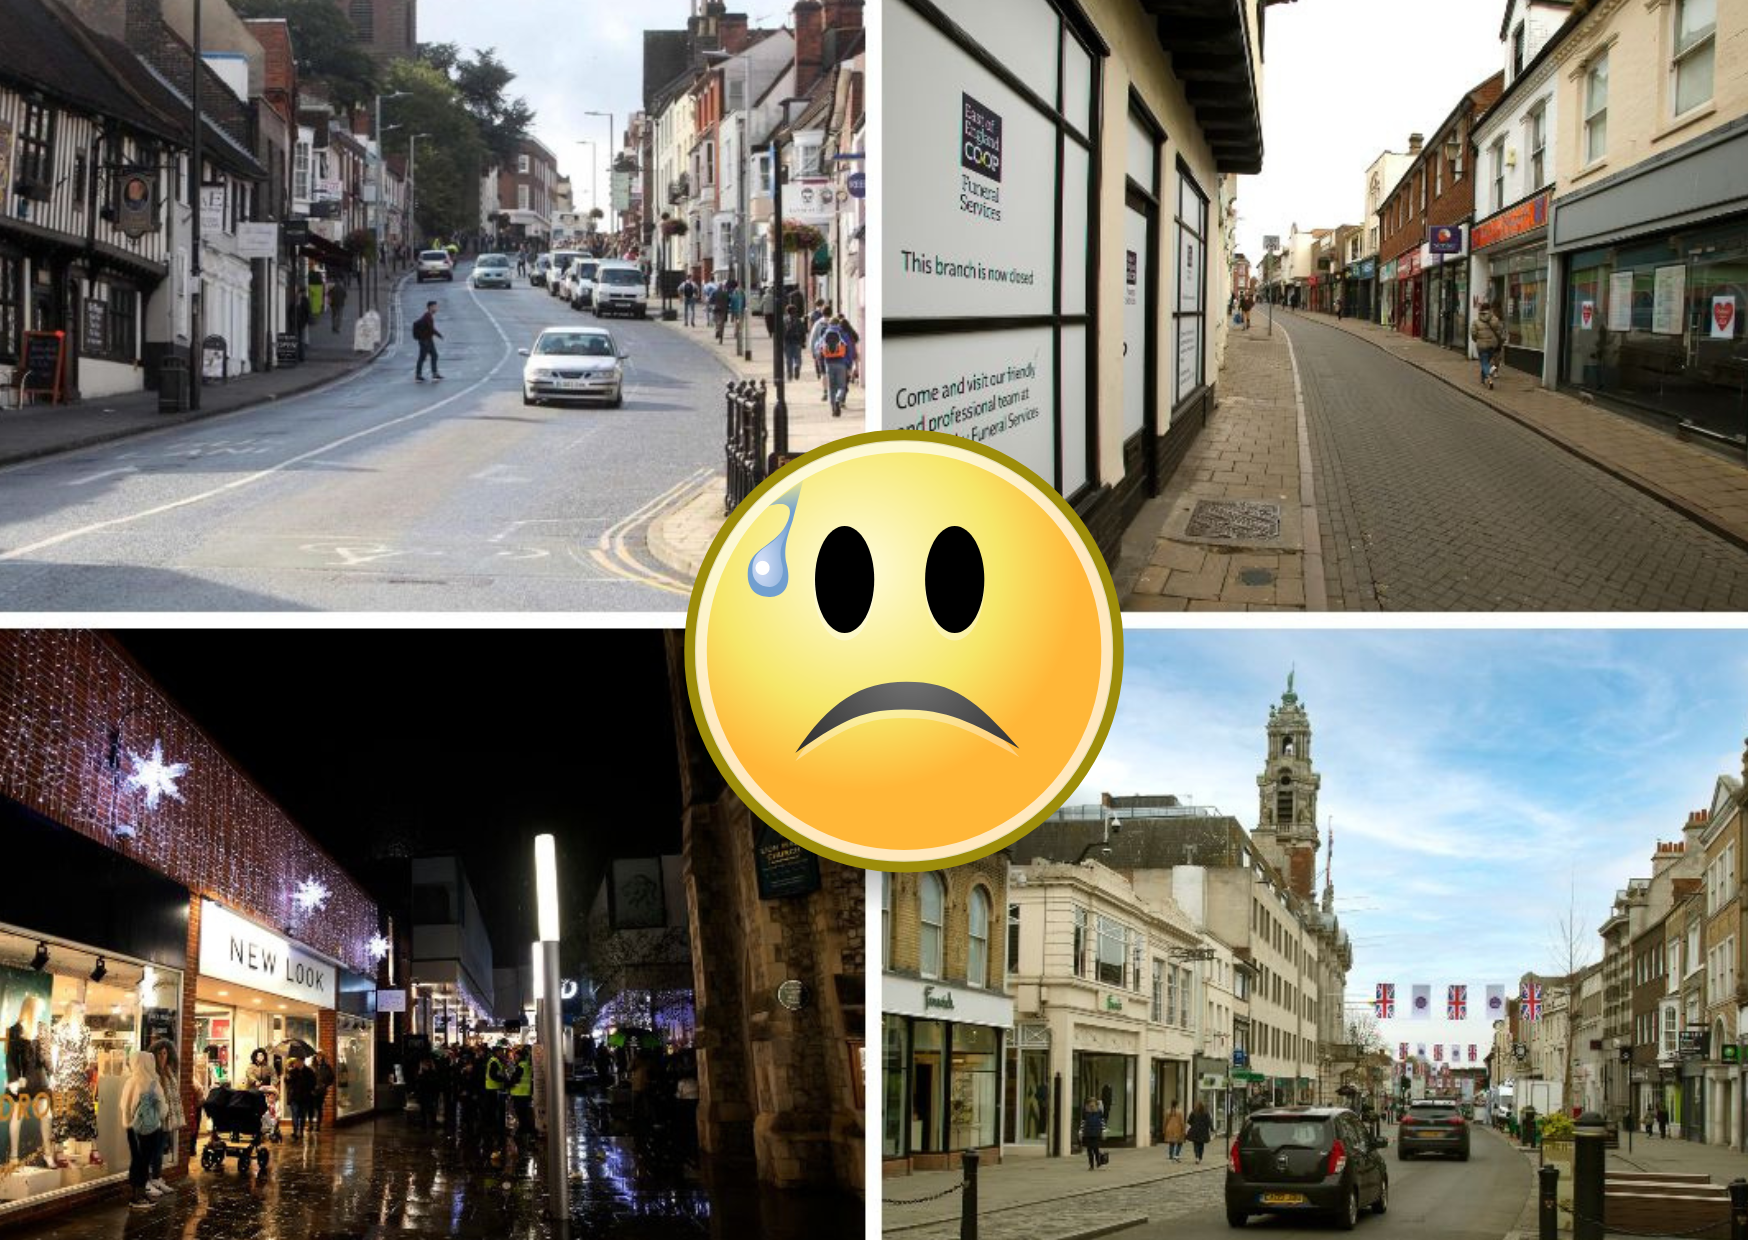 Colchester 'unhappiest place' in the country according to survey